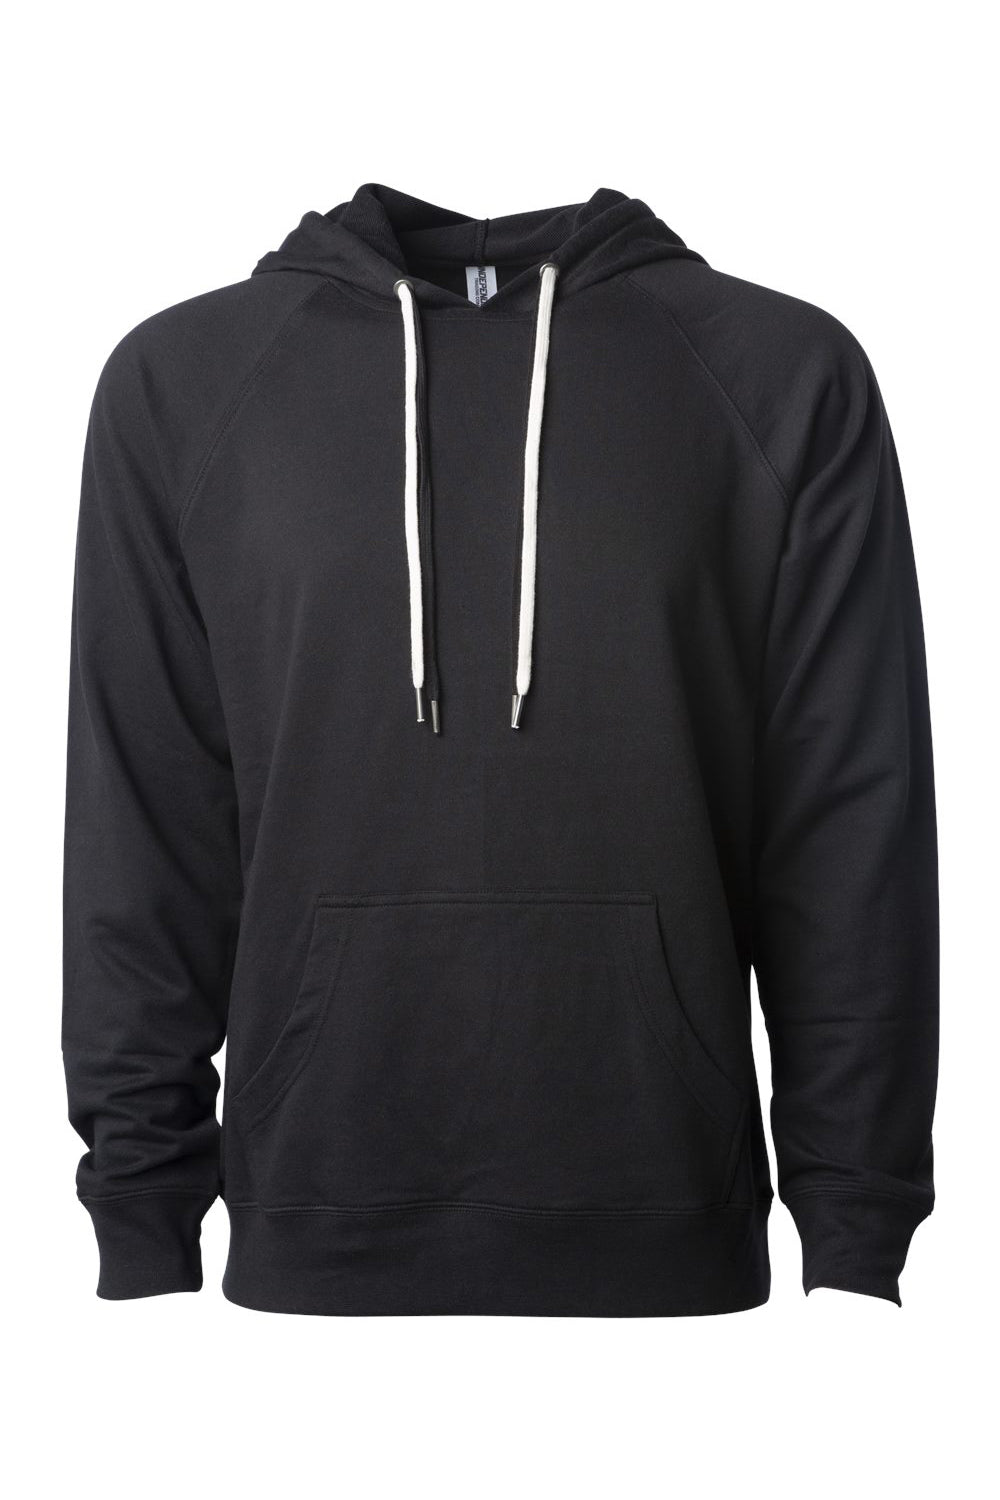 Independent Trading Co. SS1000 Mens Icon Loopback Terry Hooded Sweatshirt Hoodie Black Flat Front